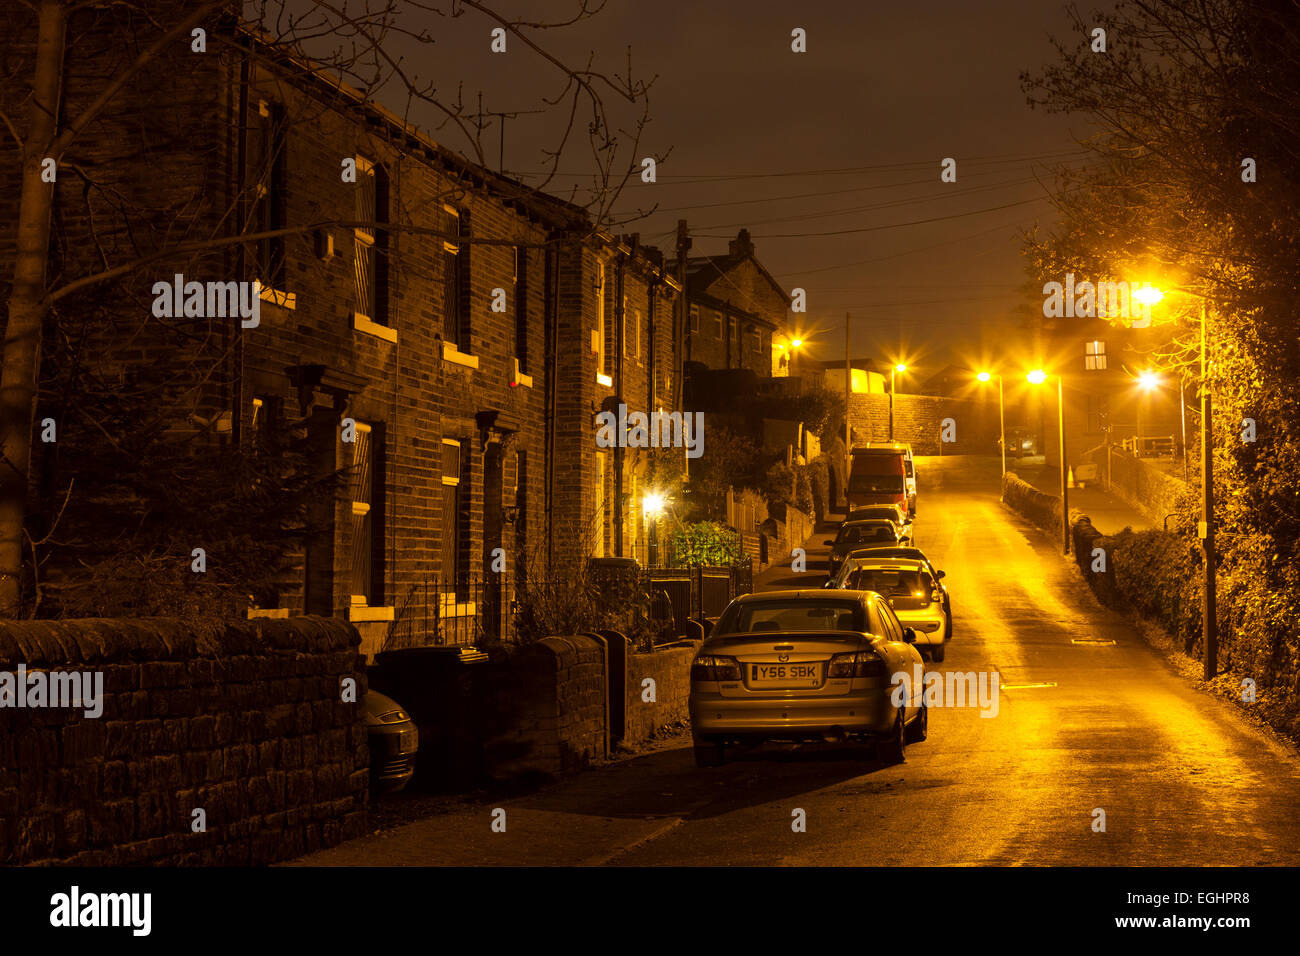 Street with parked cars at night, Sowerby Bridge, West Yorkshire Stock Photo